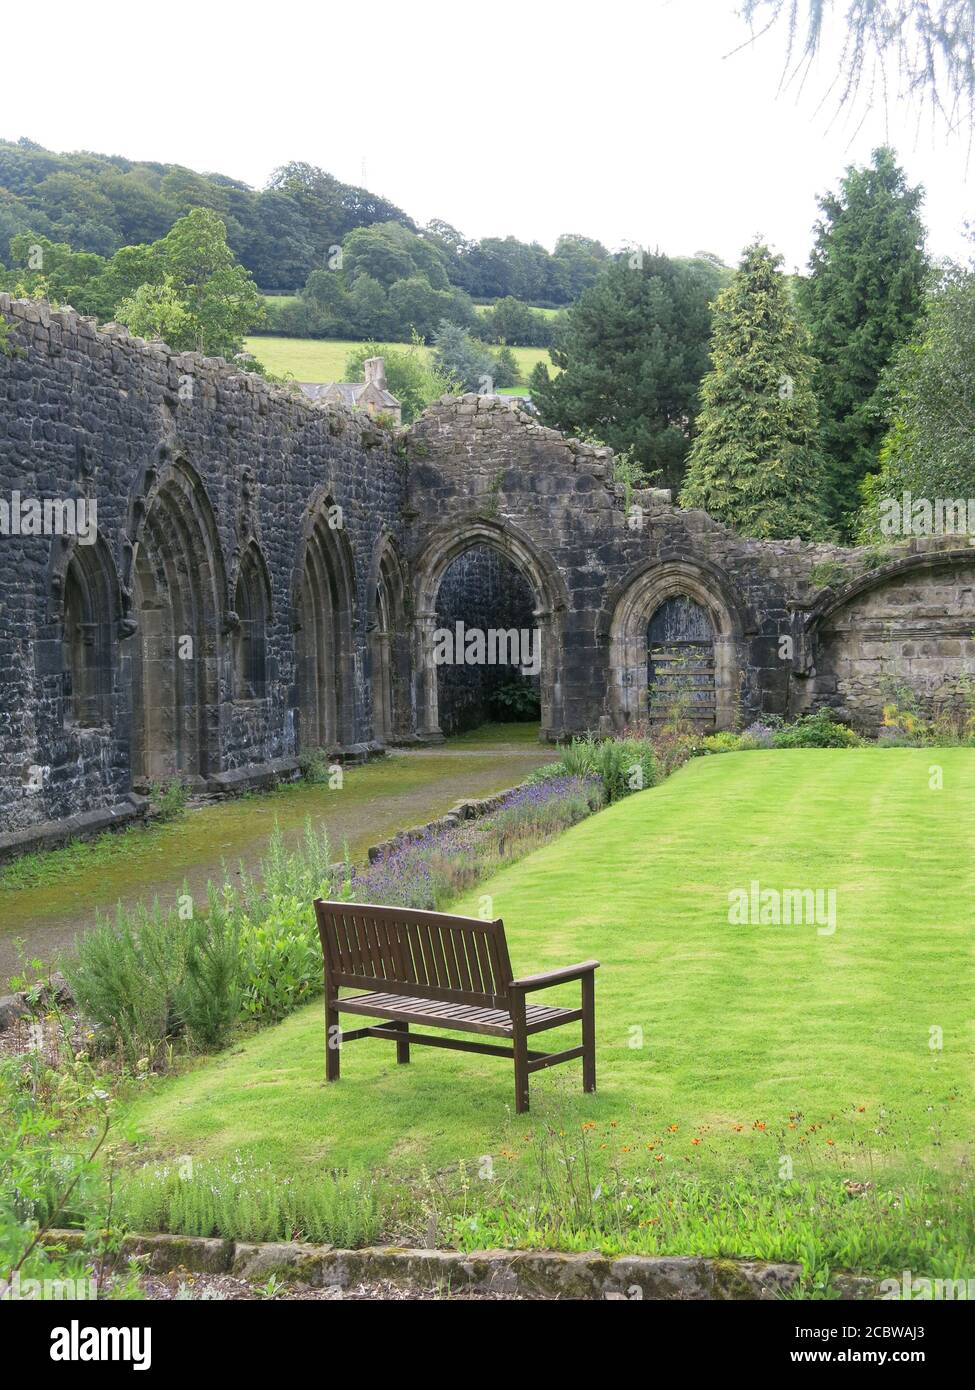 A garden bench overlooking the lawns & archways in the ancient stone walls of 14th century Whalley Abbey; a scenic place to visit, Ribble Valley. Stock Photo